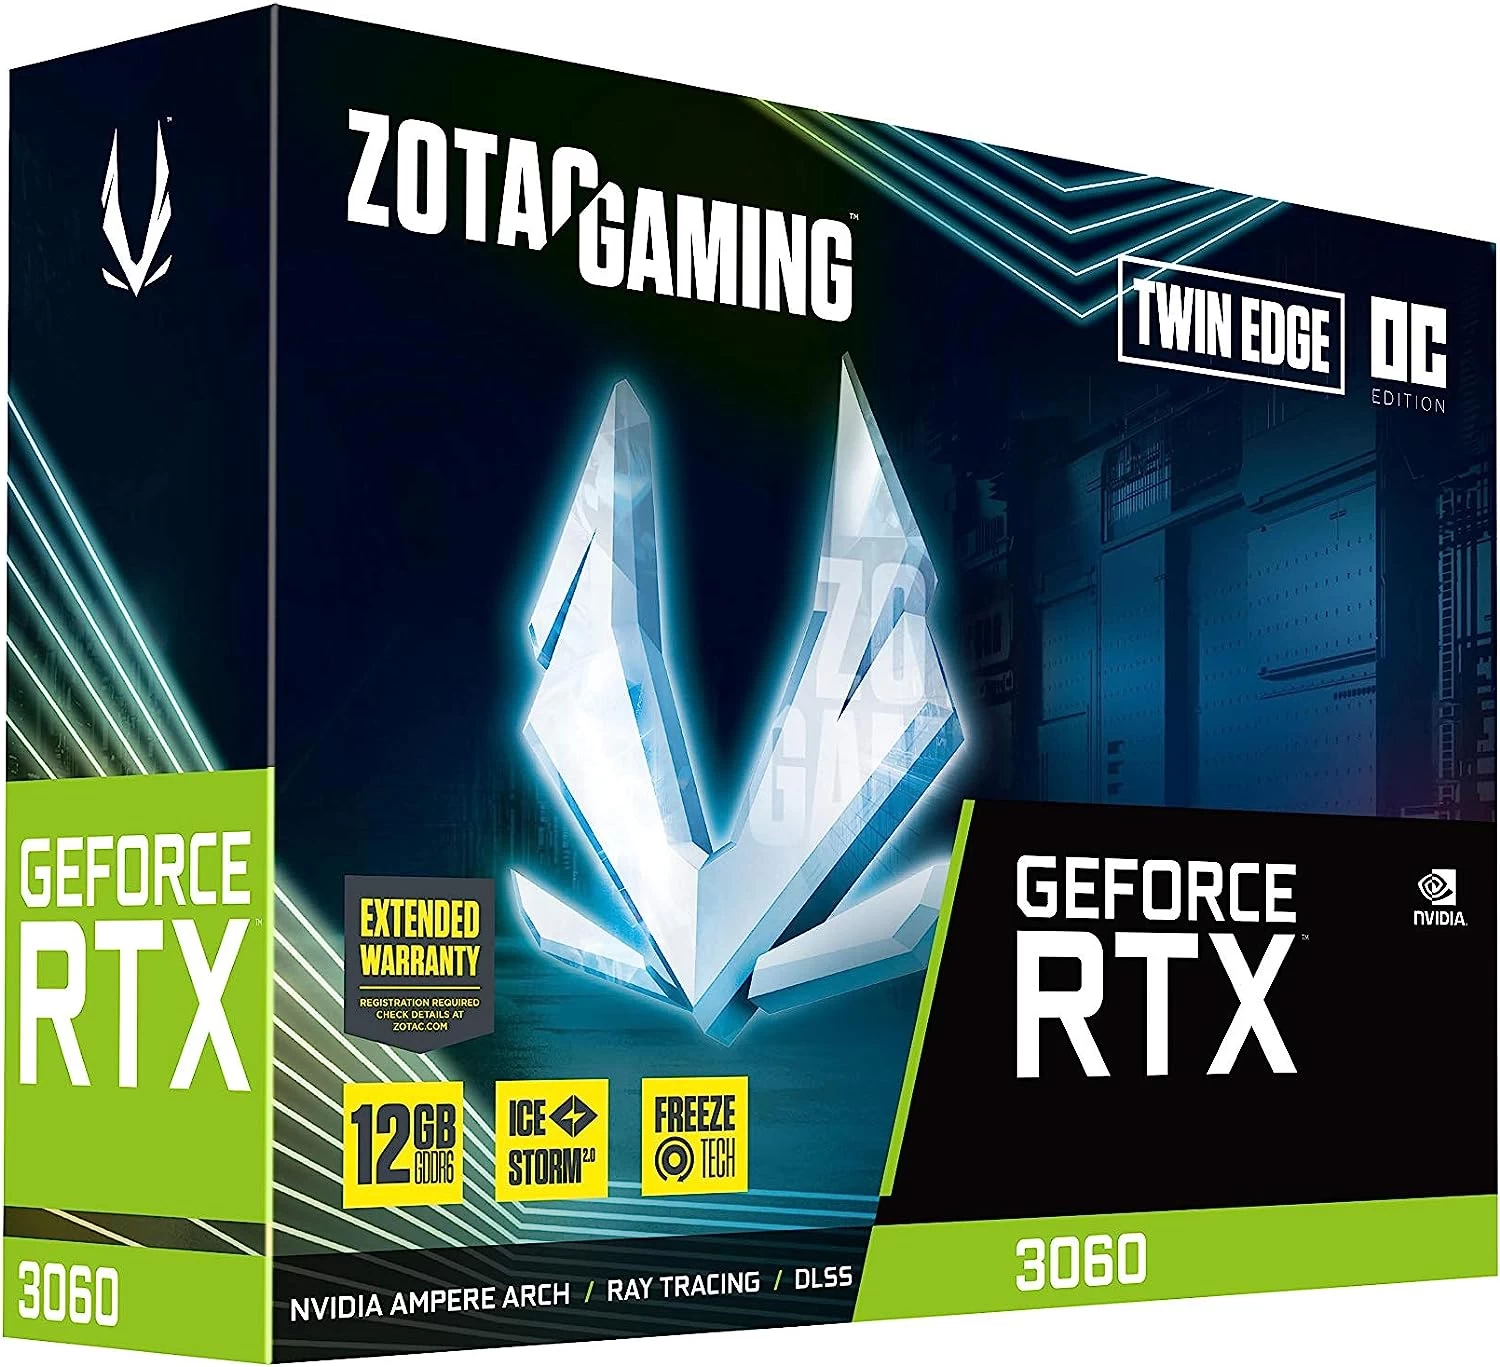 Zotac GAMING GeForce RTX 3060 Twin Edge OC Package Content